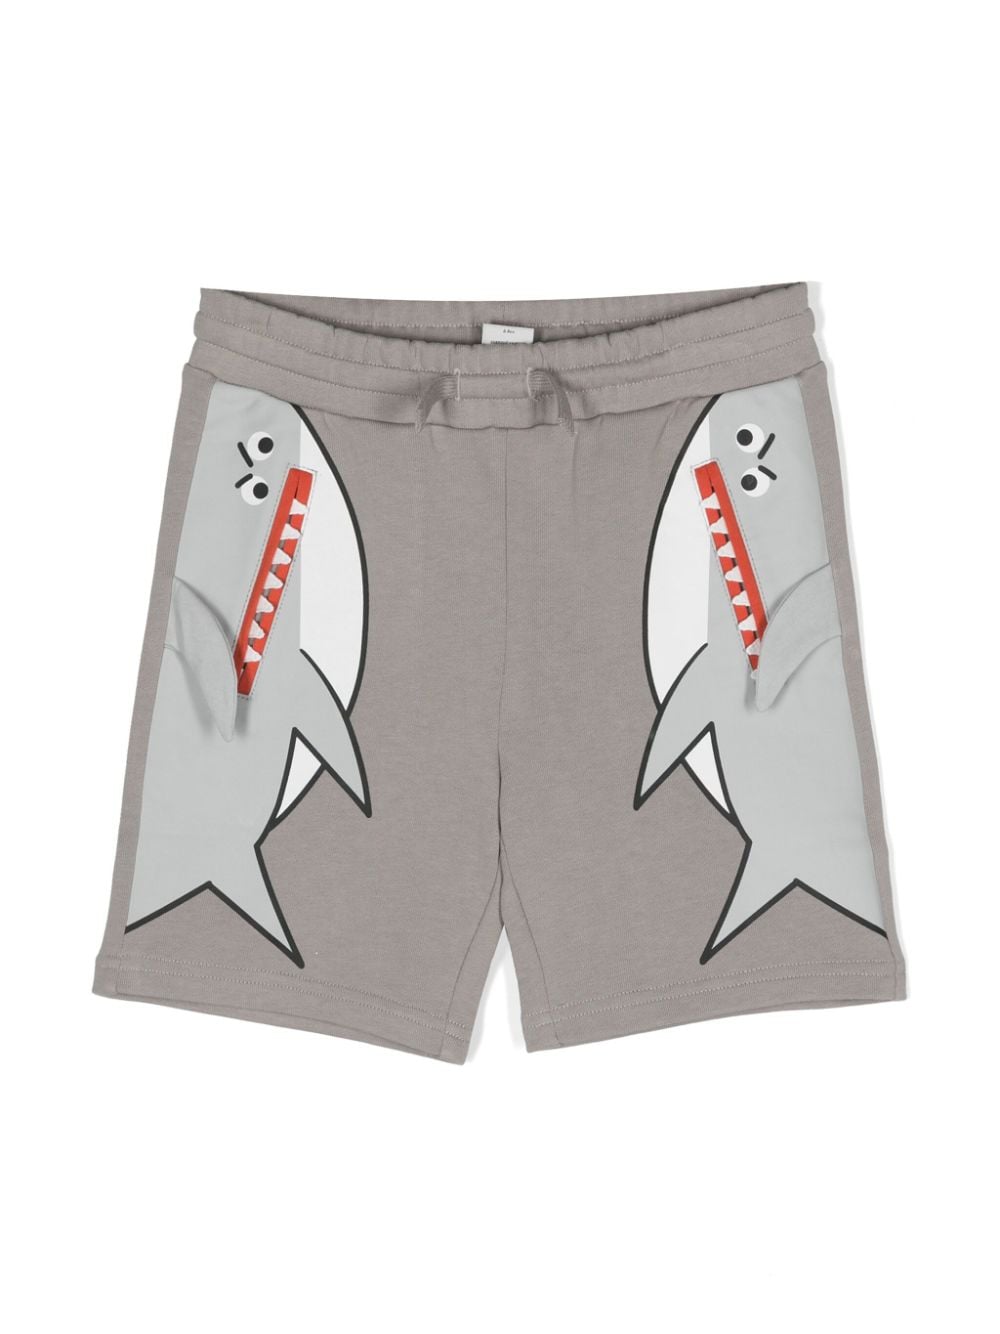 Gray Bermuda shorts for boys with print